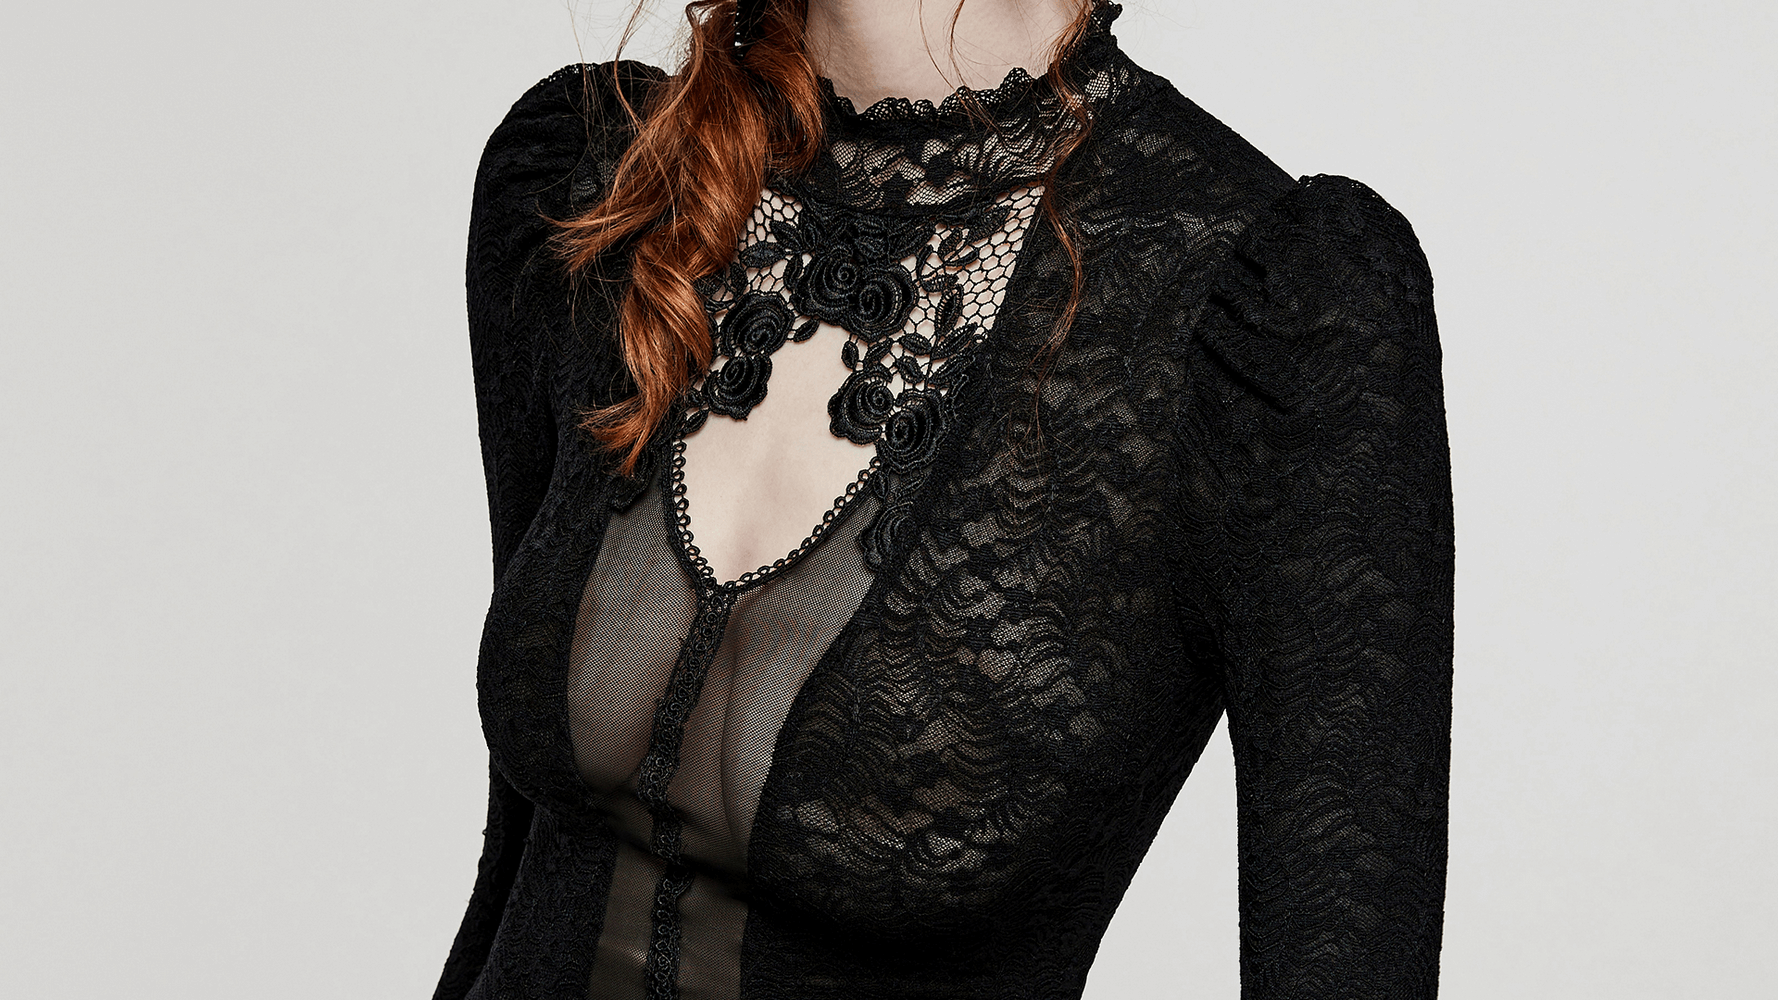 Victorian Women's Lace Gothic Top with Mesh Detail - HARD'N'HEAVY